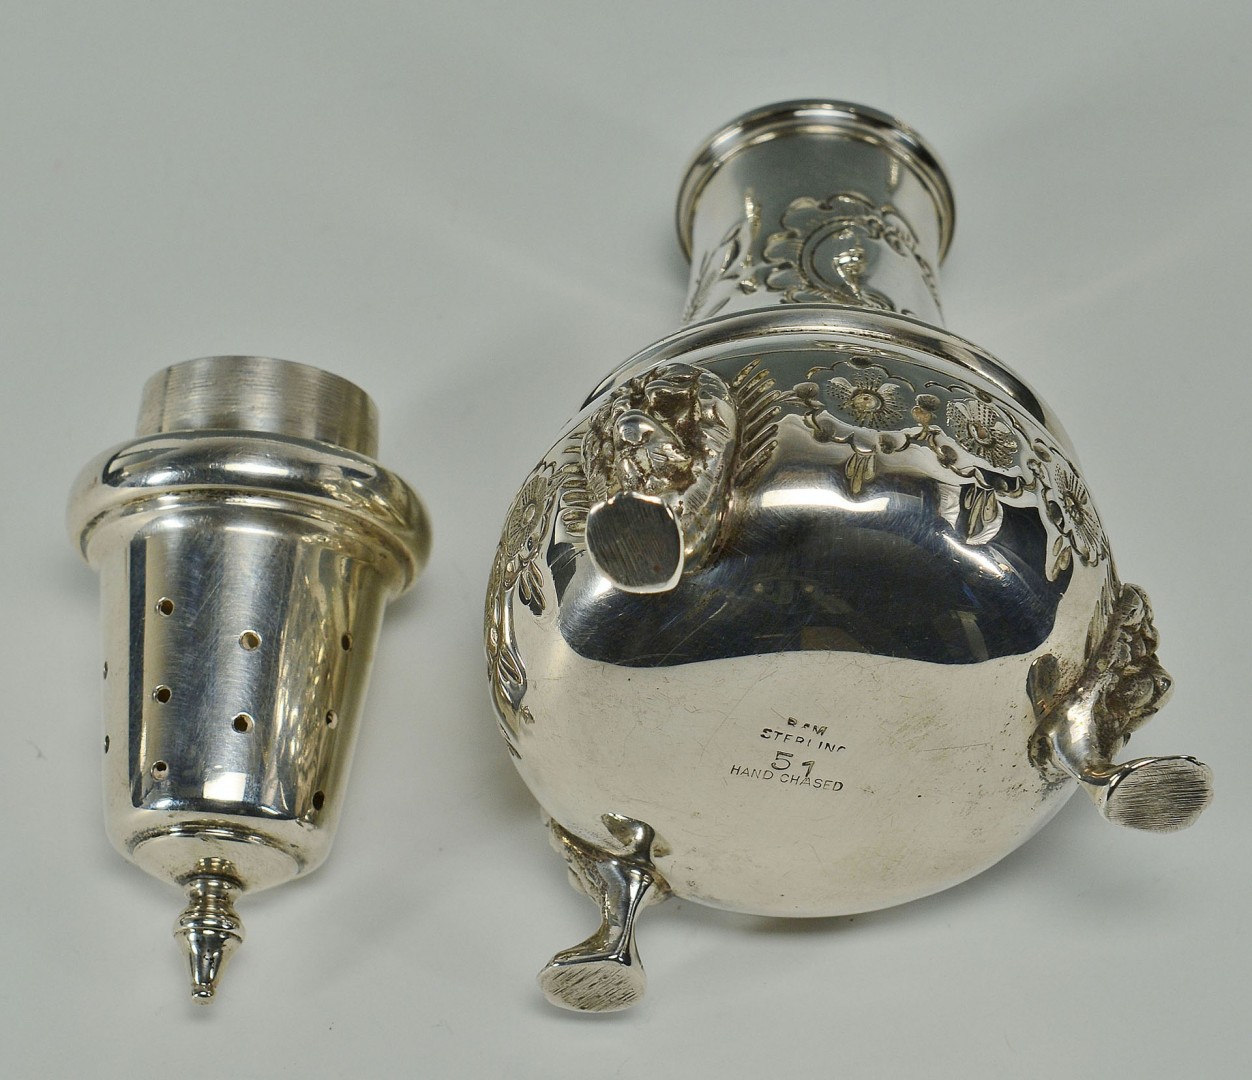 Lot 295: Hand chased sterling silver salts and peppers